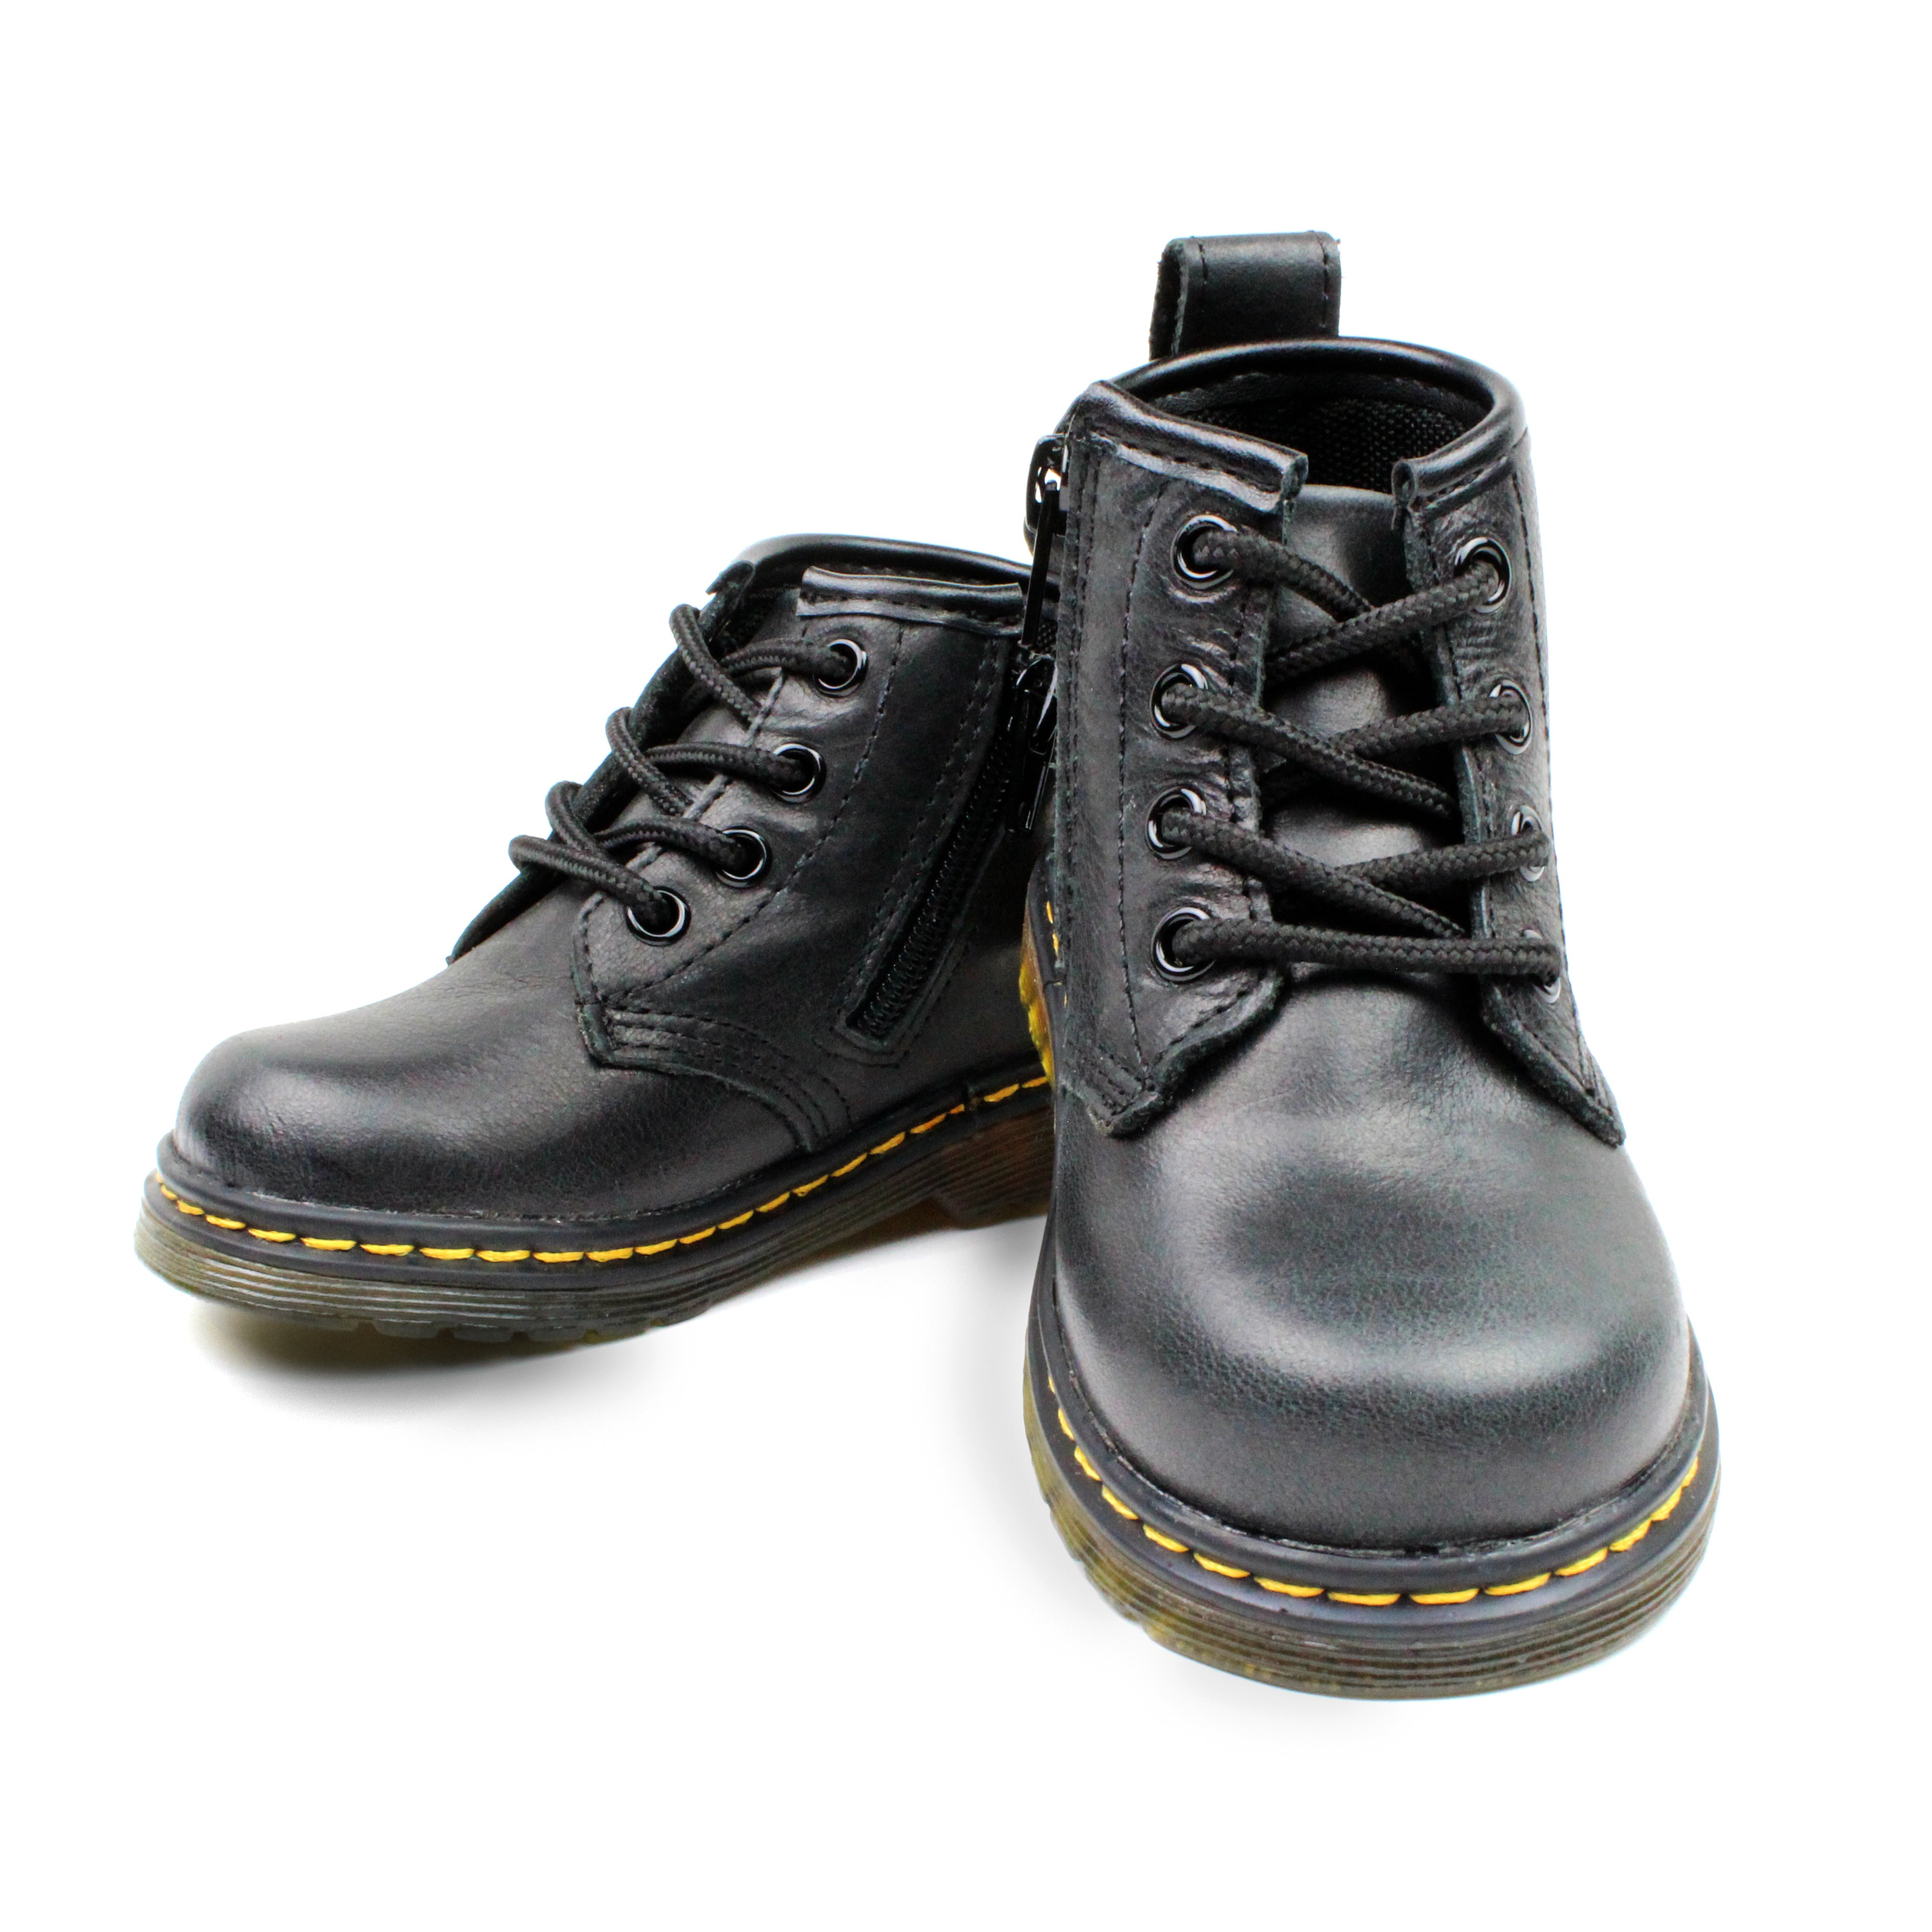 Piper Finn - Baby & Toddler Leather Shoes - Combat Boots - Black ...